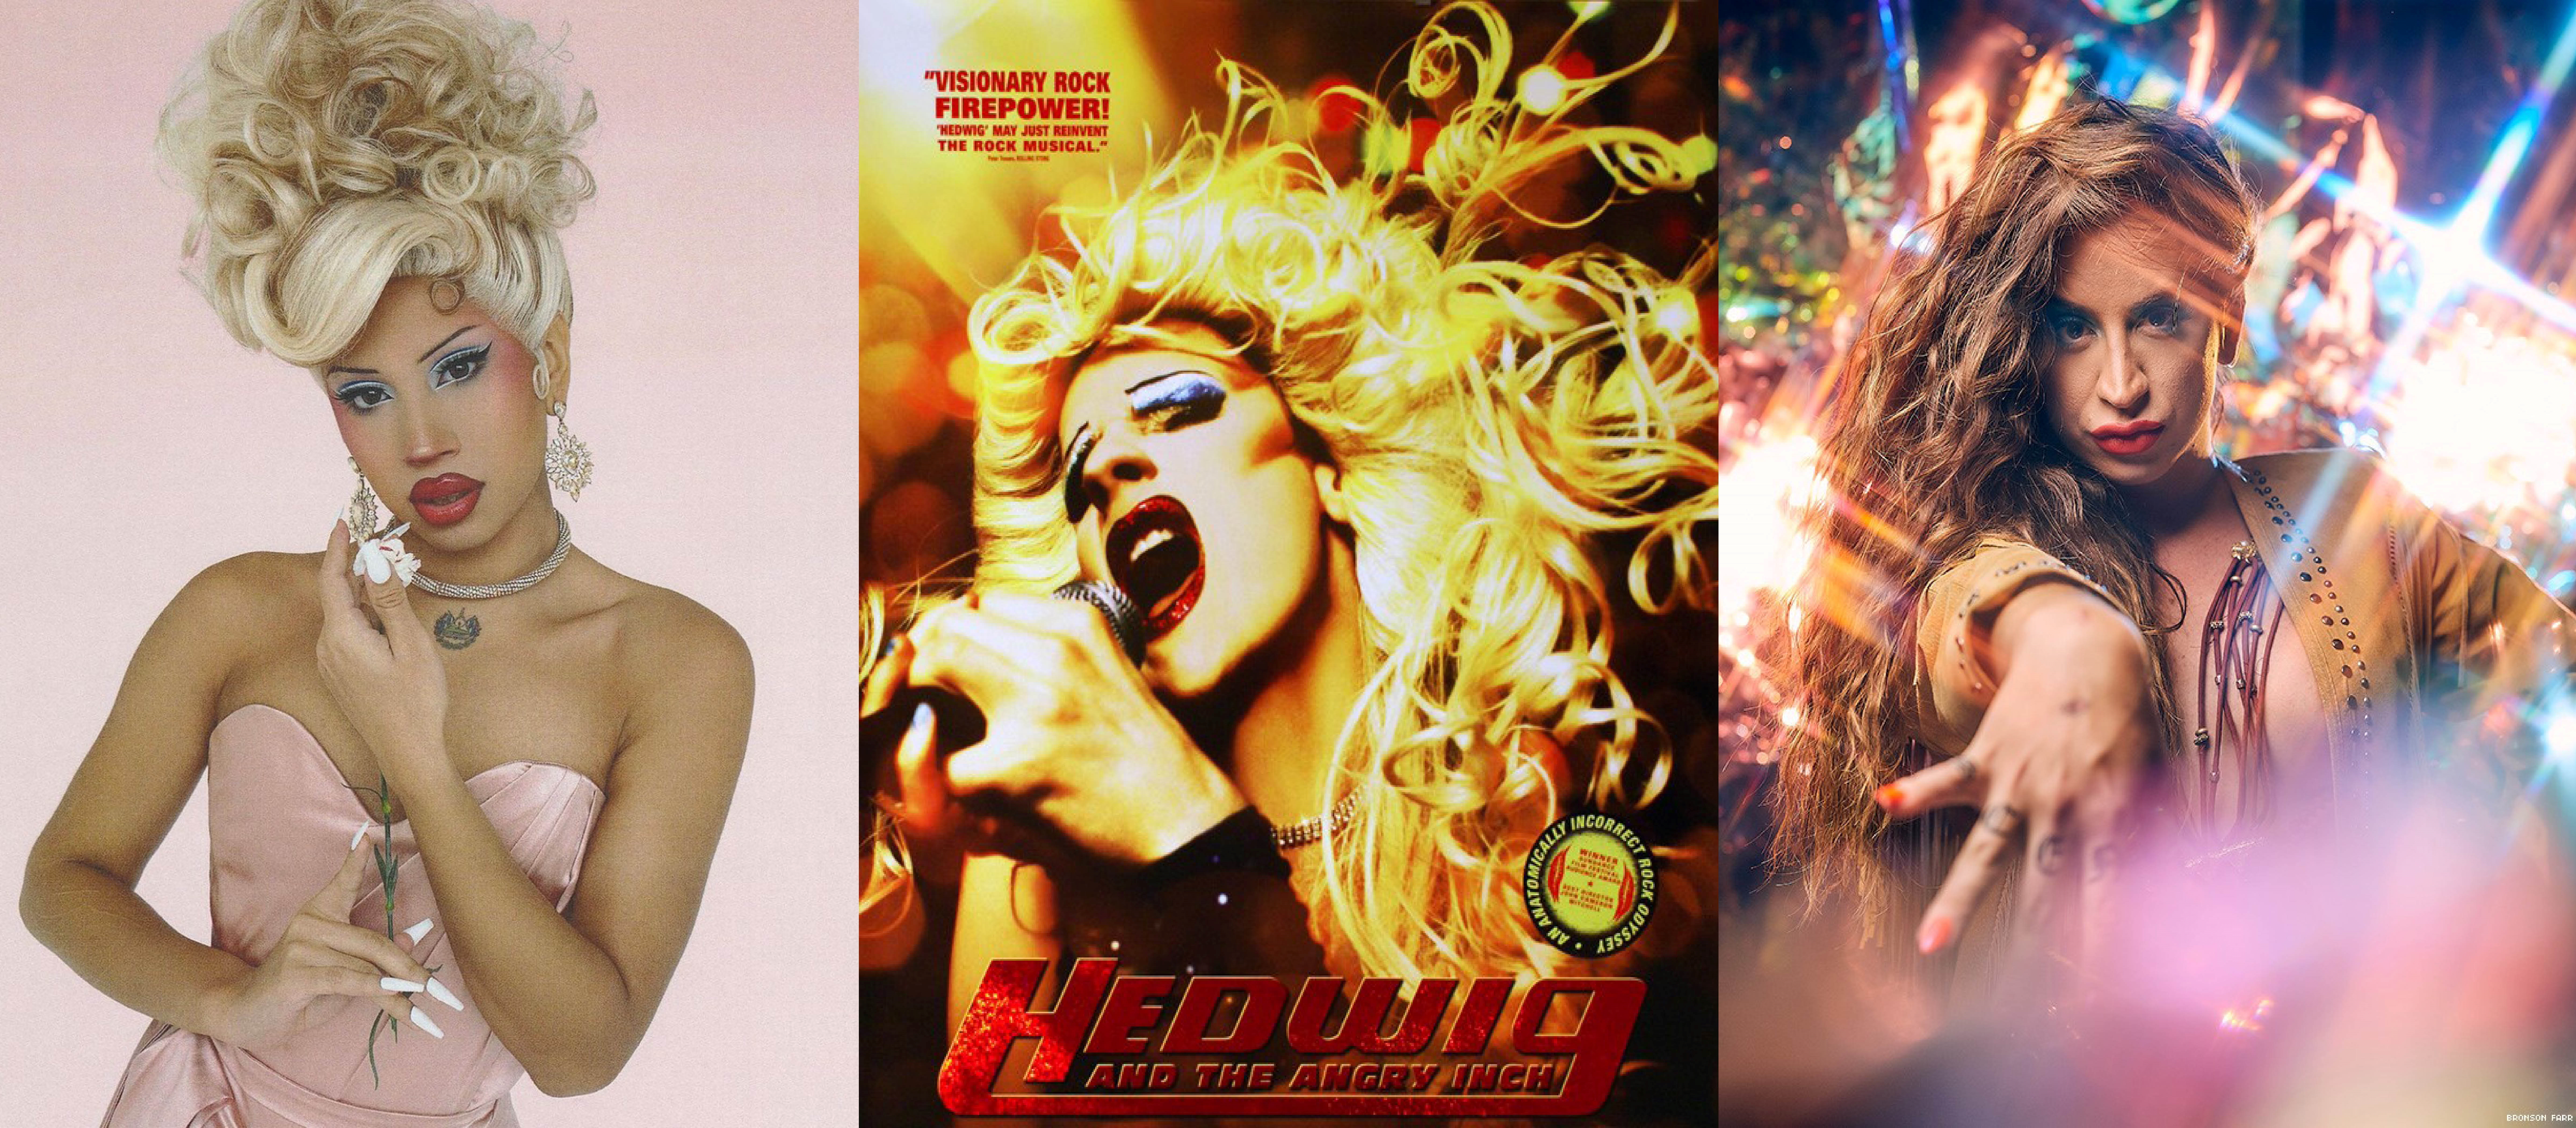 Trois images de gauche à droite : Chiquitita, Hedwig and the Angry Inch poster, Charlene Incarnate